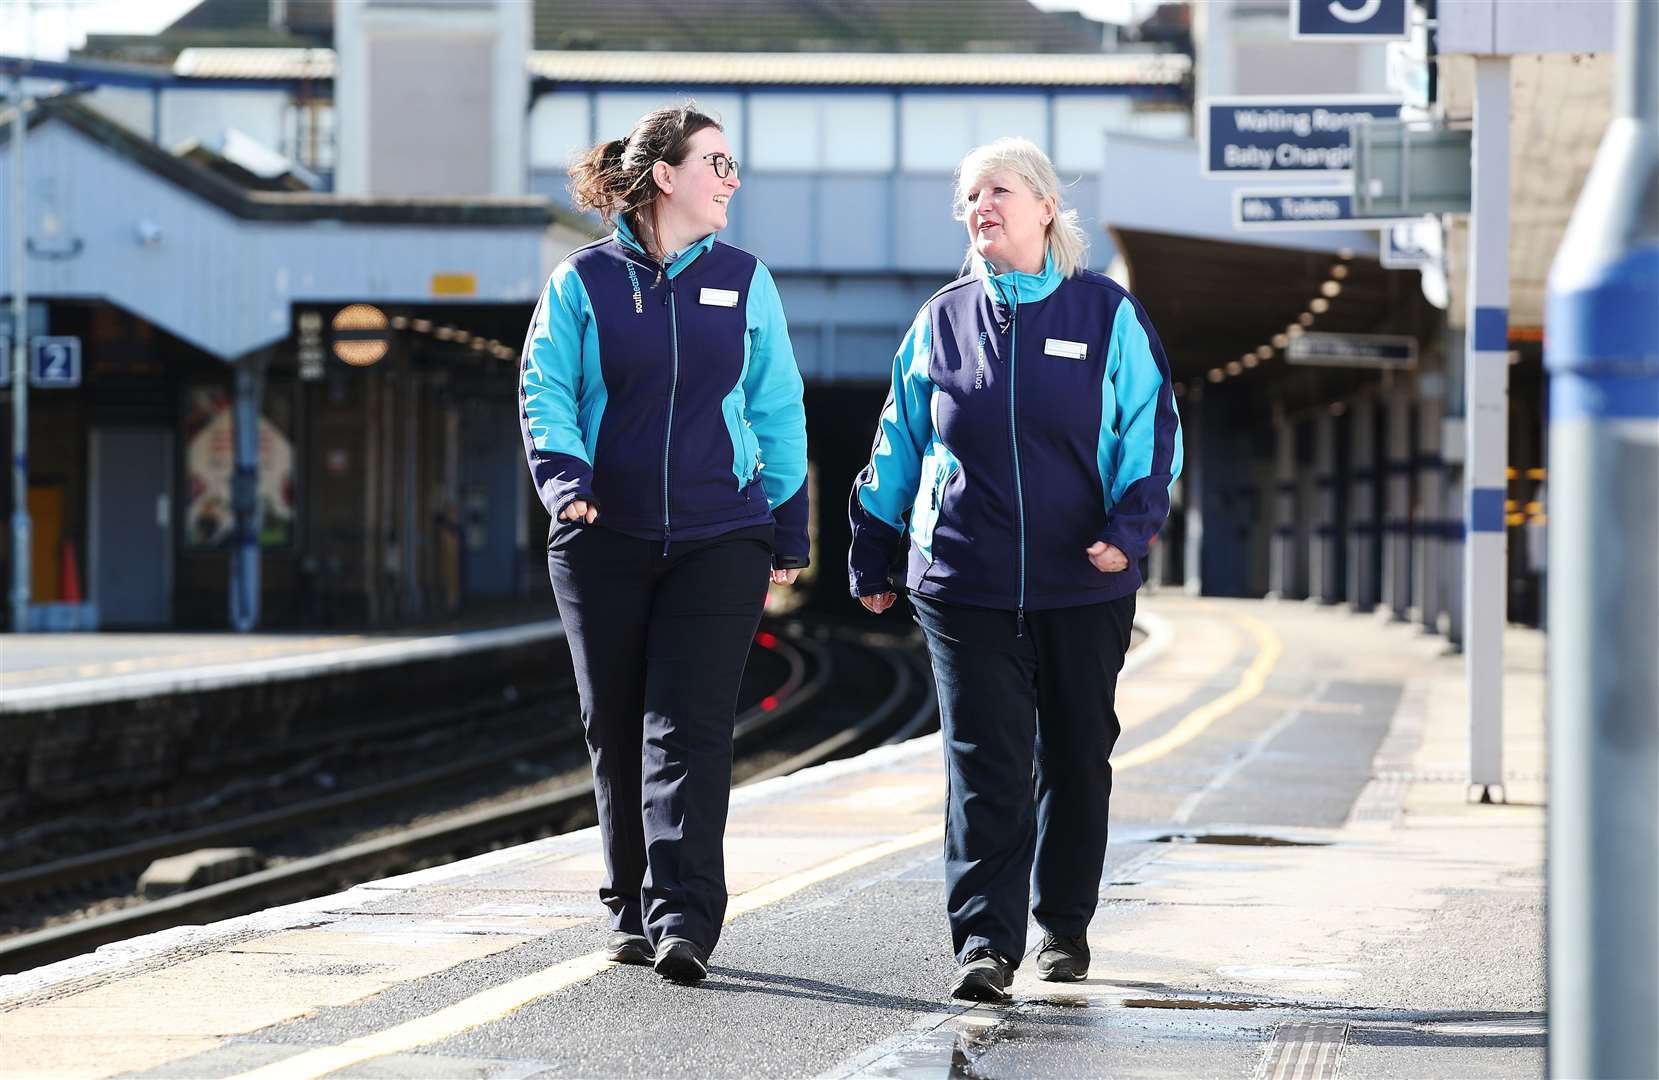 Mother's Day will be another day at work for trainee train drivers Cynthia and Vicki McCarry